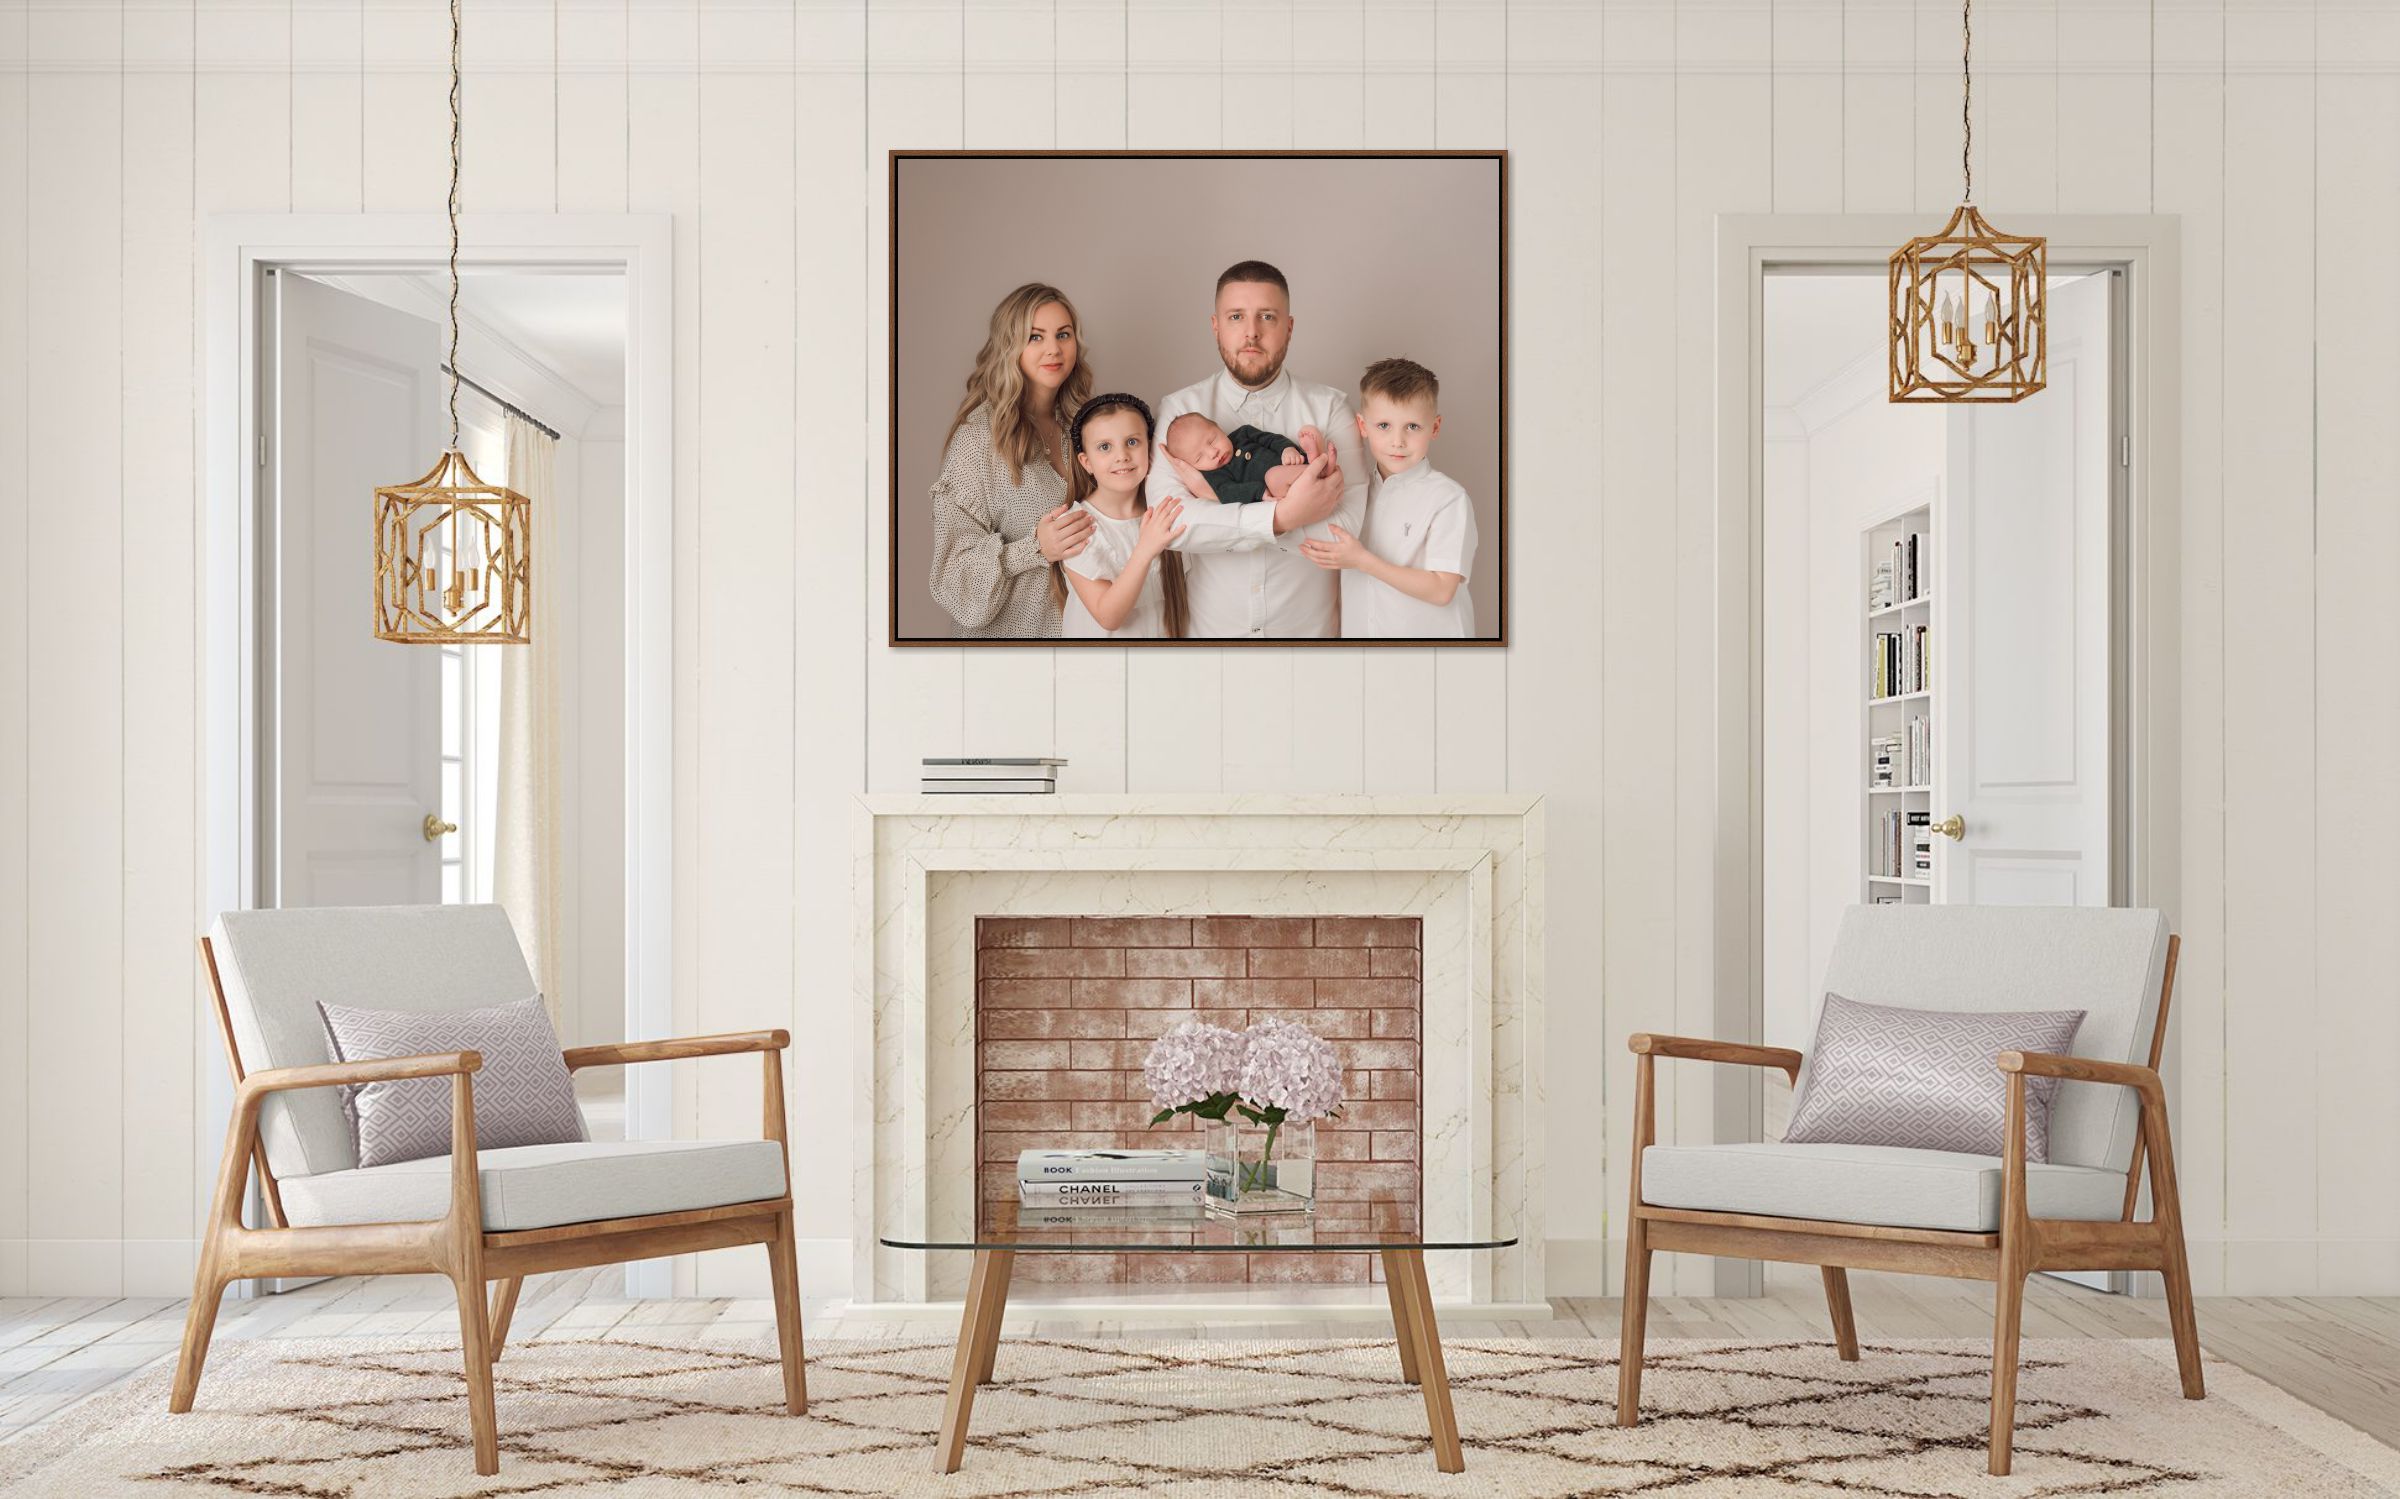 family photograph displayed in home from swansea photoshoot